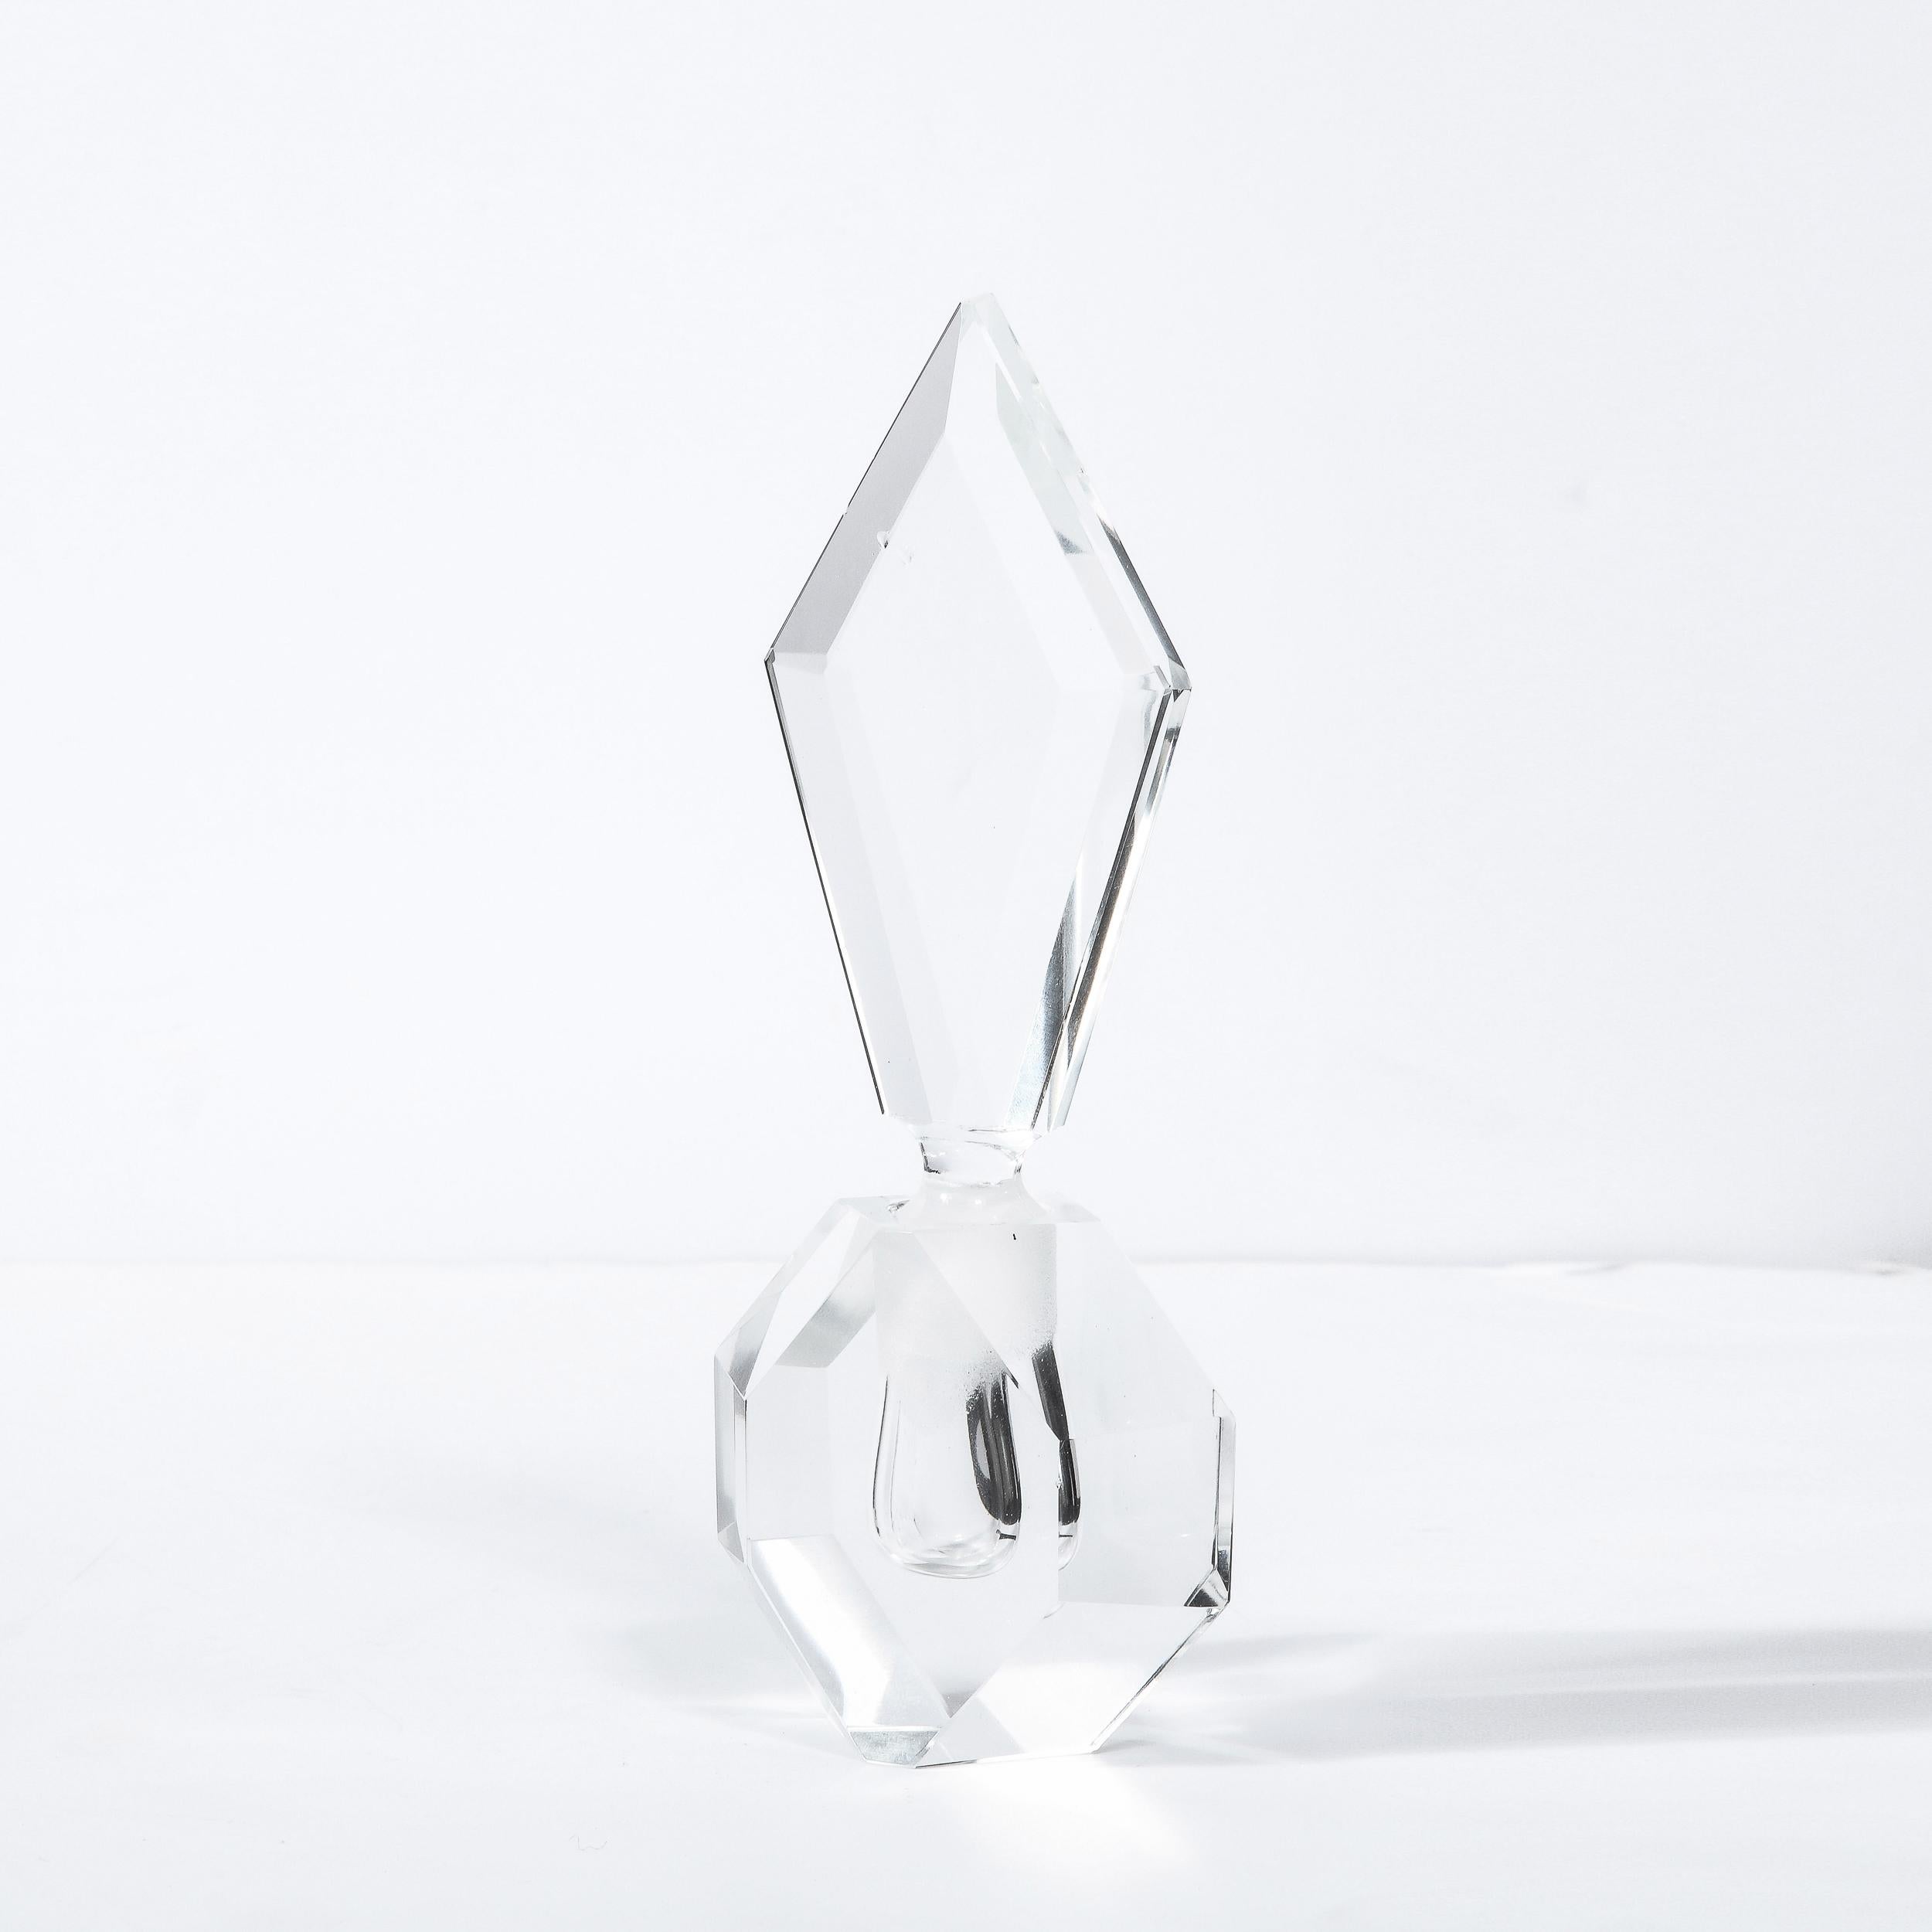 This elegant Art Deco perfume bottle was realized in the United States circa 1935. It features a prismatic geometric form of cut translucent crystal- resembling a small diamond. It is fitted with an elongated rhombus form stopper also in cut crystal